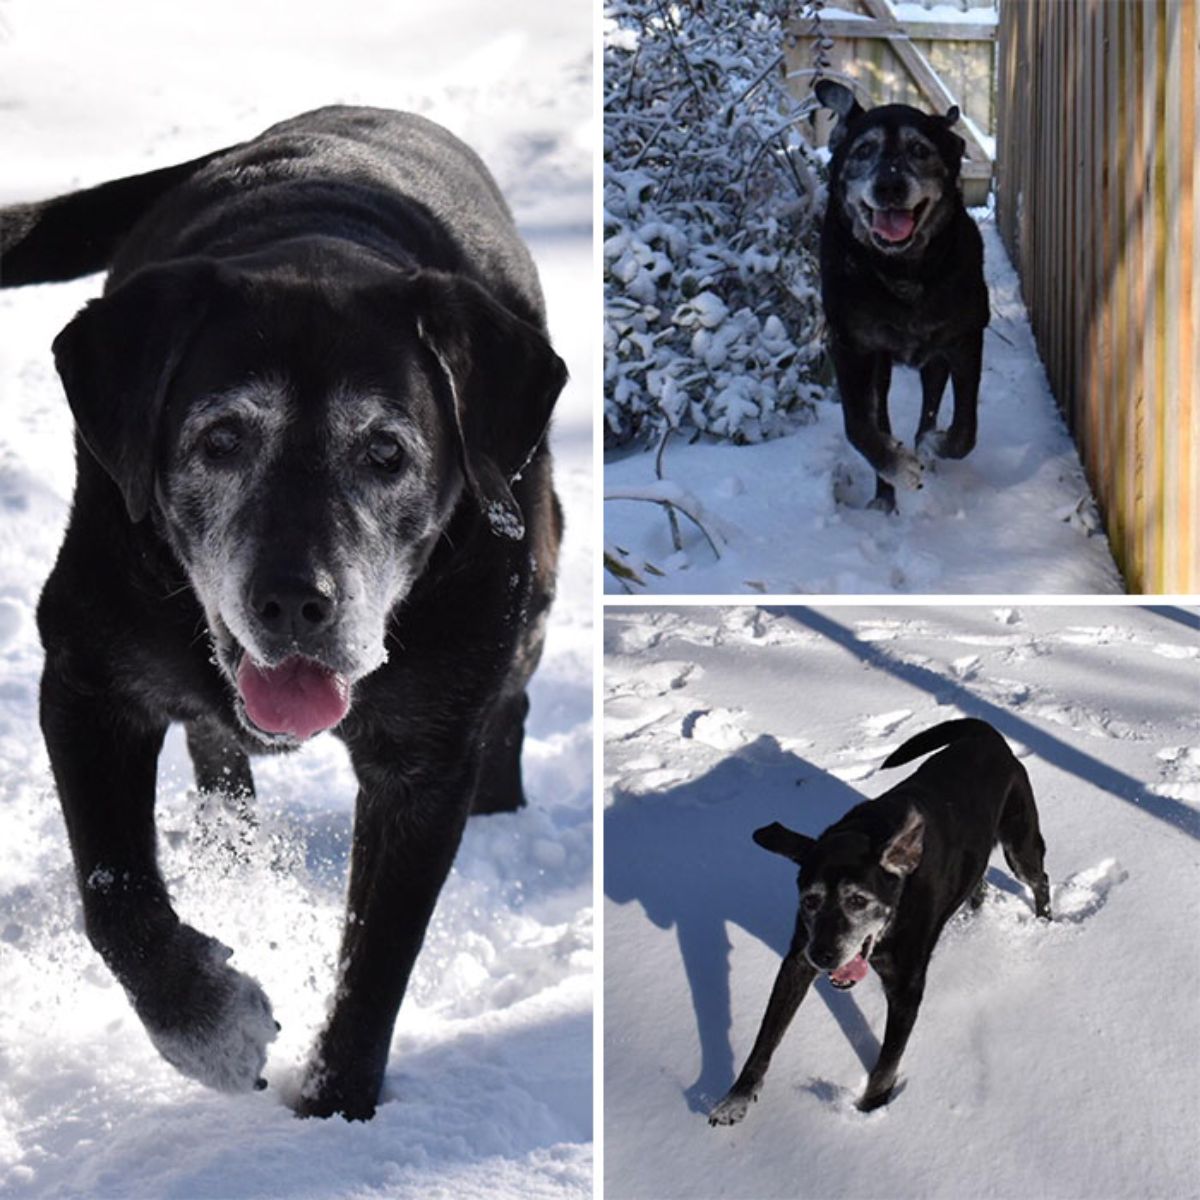 3 photos of an old black dog running on snow